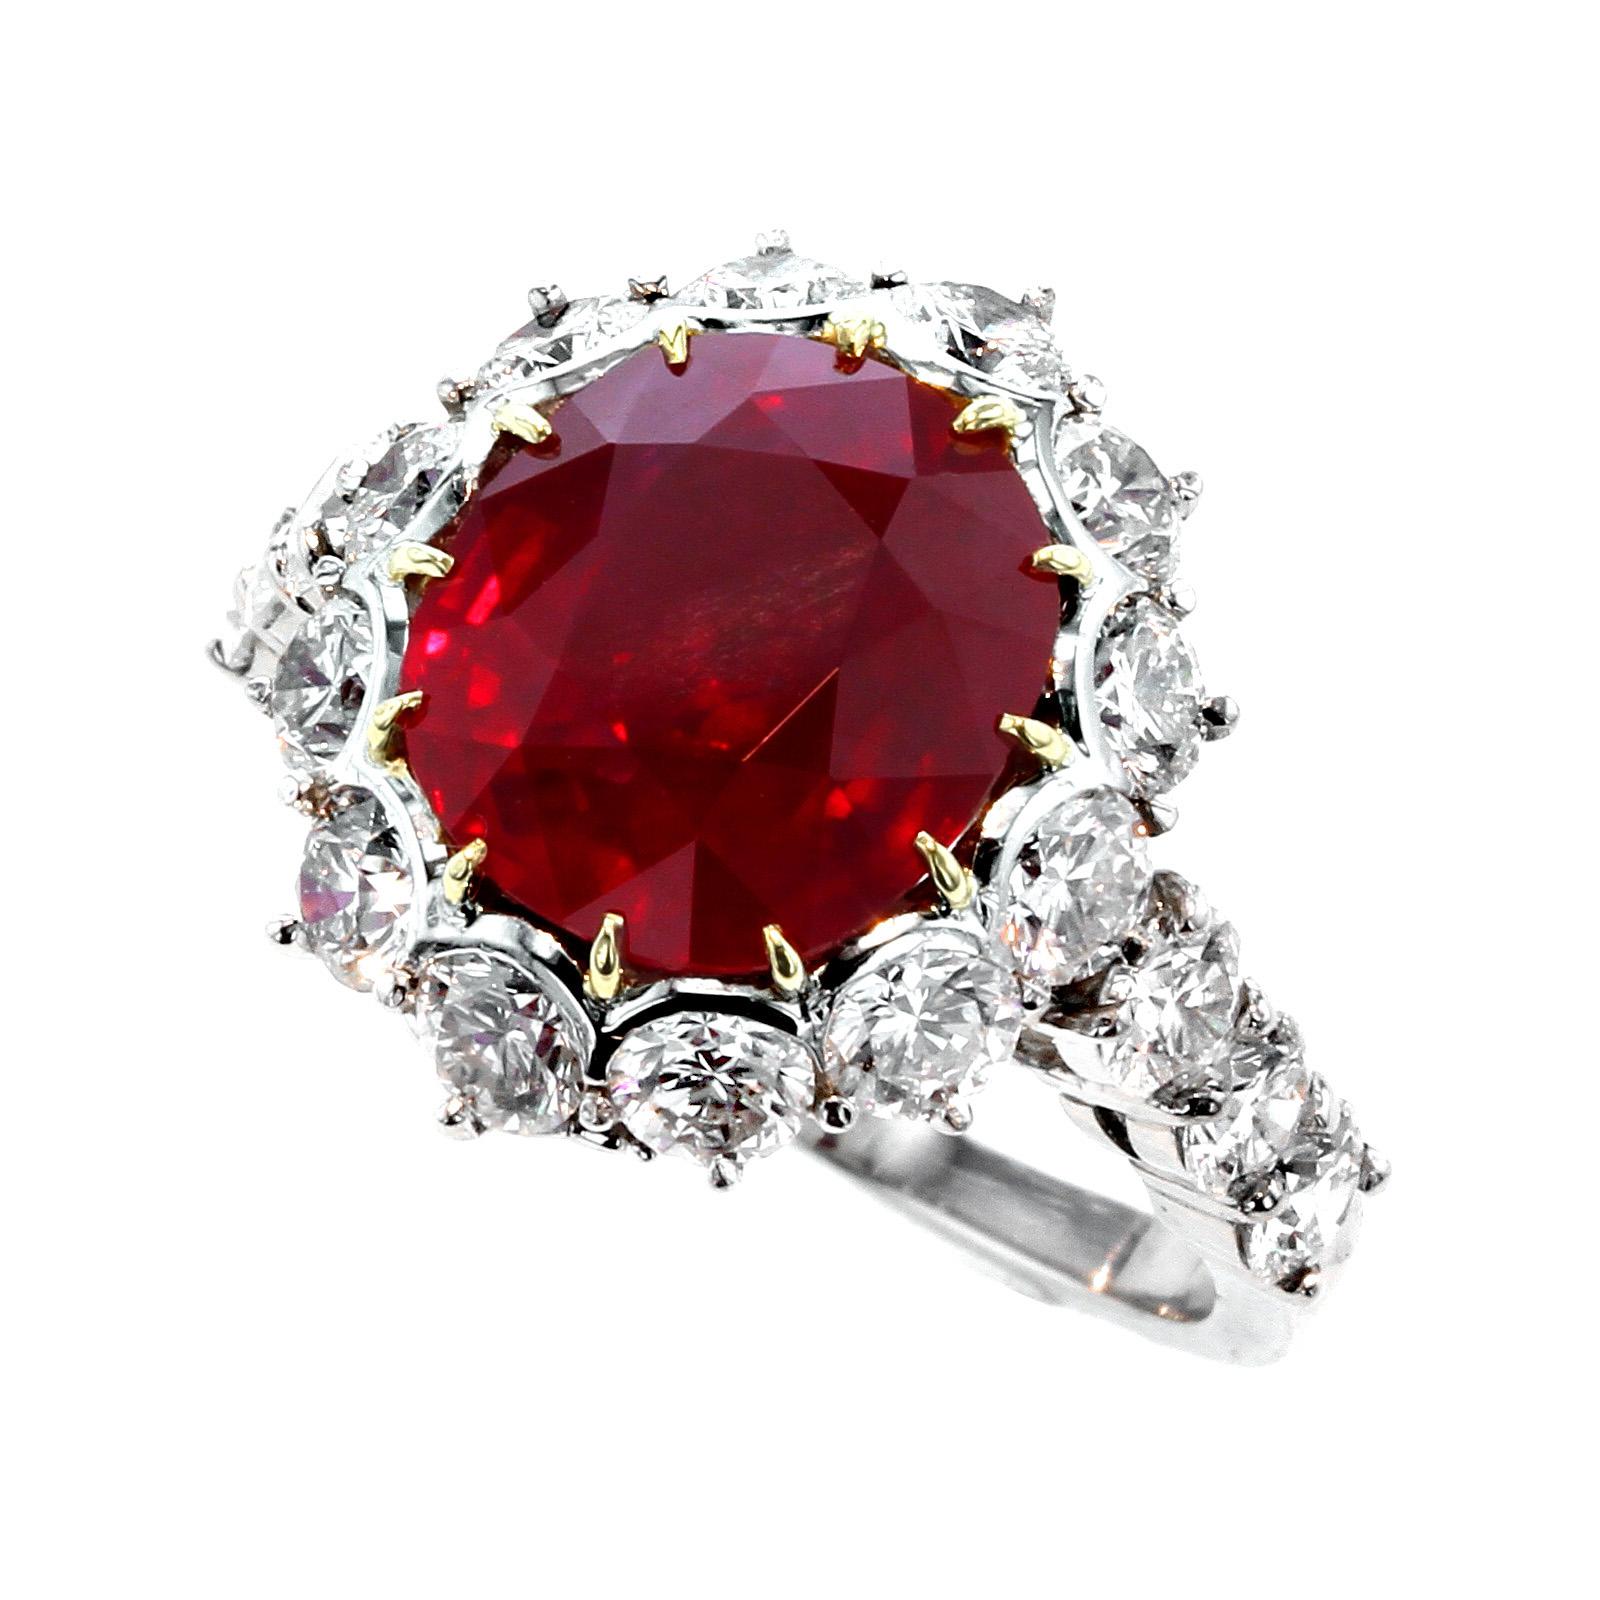 A beautiful and stunning ring centered with a five carat ruby from the coveted mines of Burma (Myanmar) surrounded with eighteen round brilliant-cut diamonds, along with a diamond encrusted 'G'; stamped GARRARD, and PT900, ring size 5 3/4 US.

The